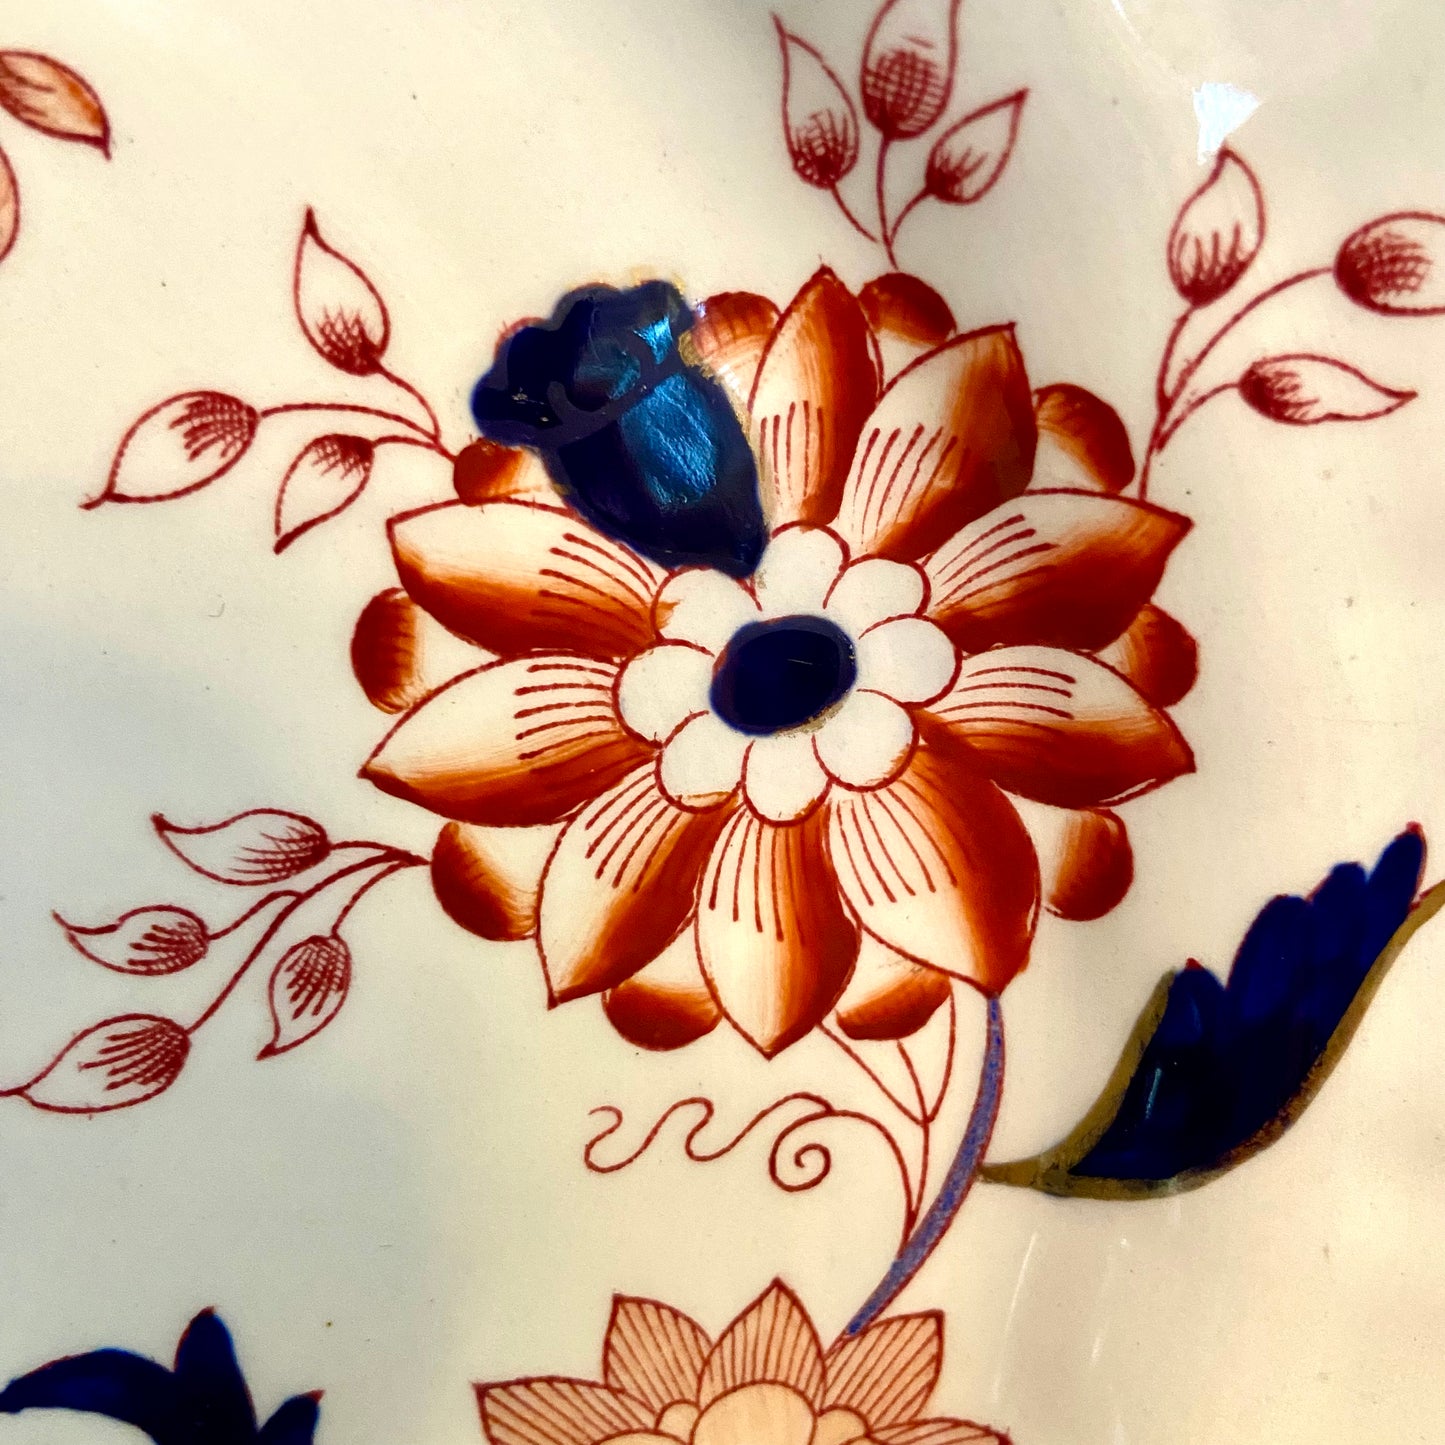 STUNNING - BOOTHS "FREIAN” China set of 3 Dinner Imari floral blue and white plates